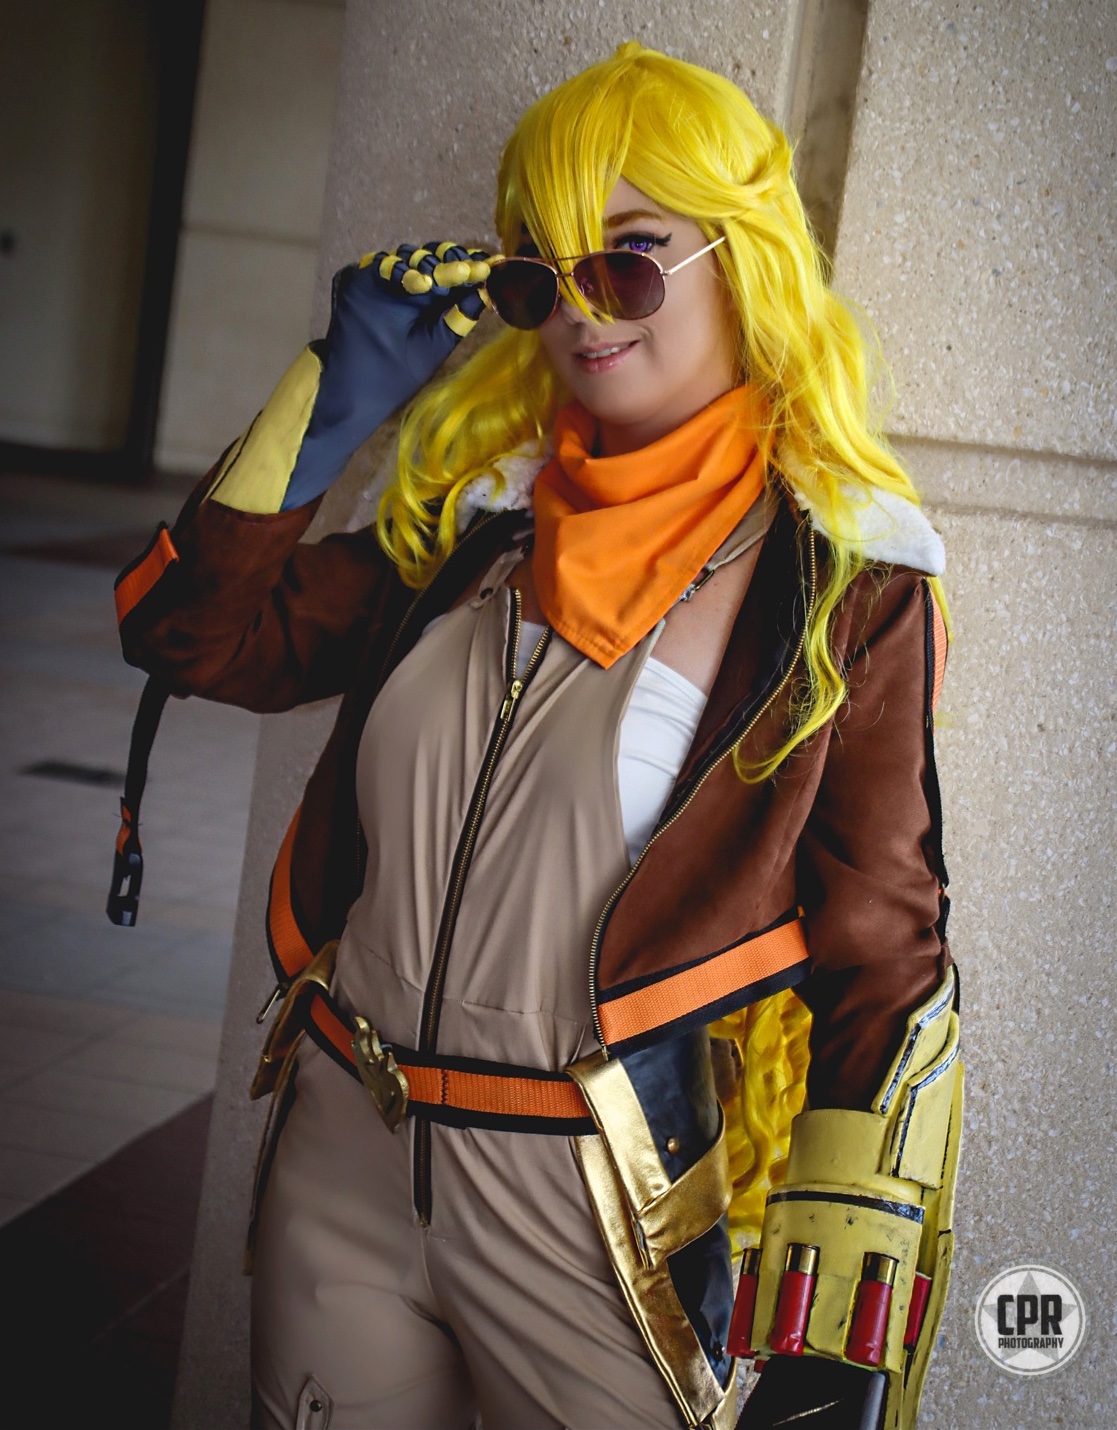 Christina modeling the full Yang Costume, looking over the top of a pair of aviator sunglasses